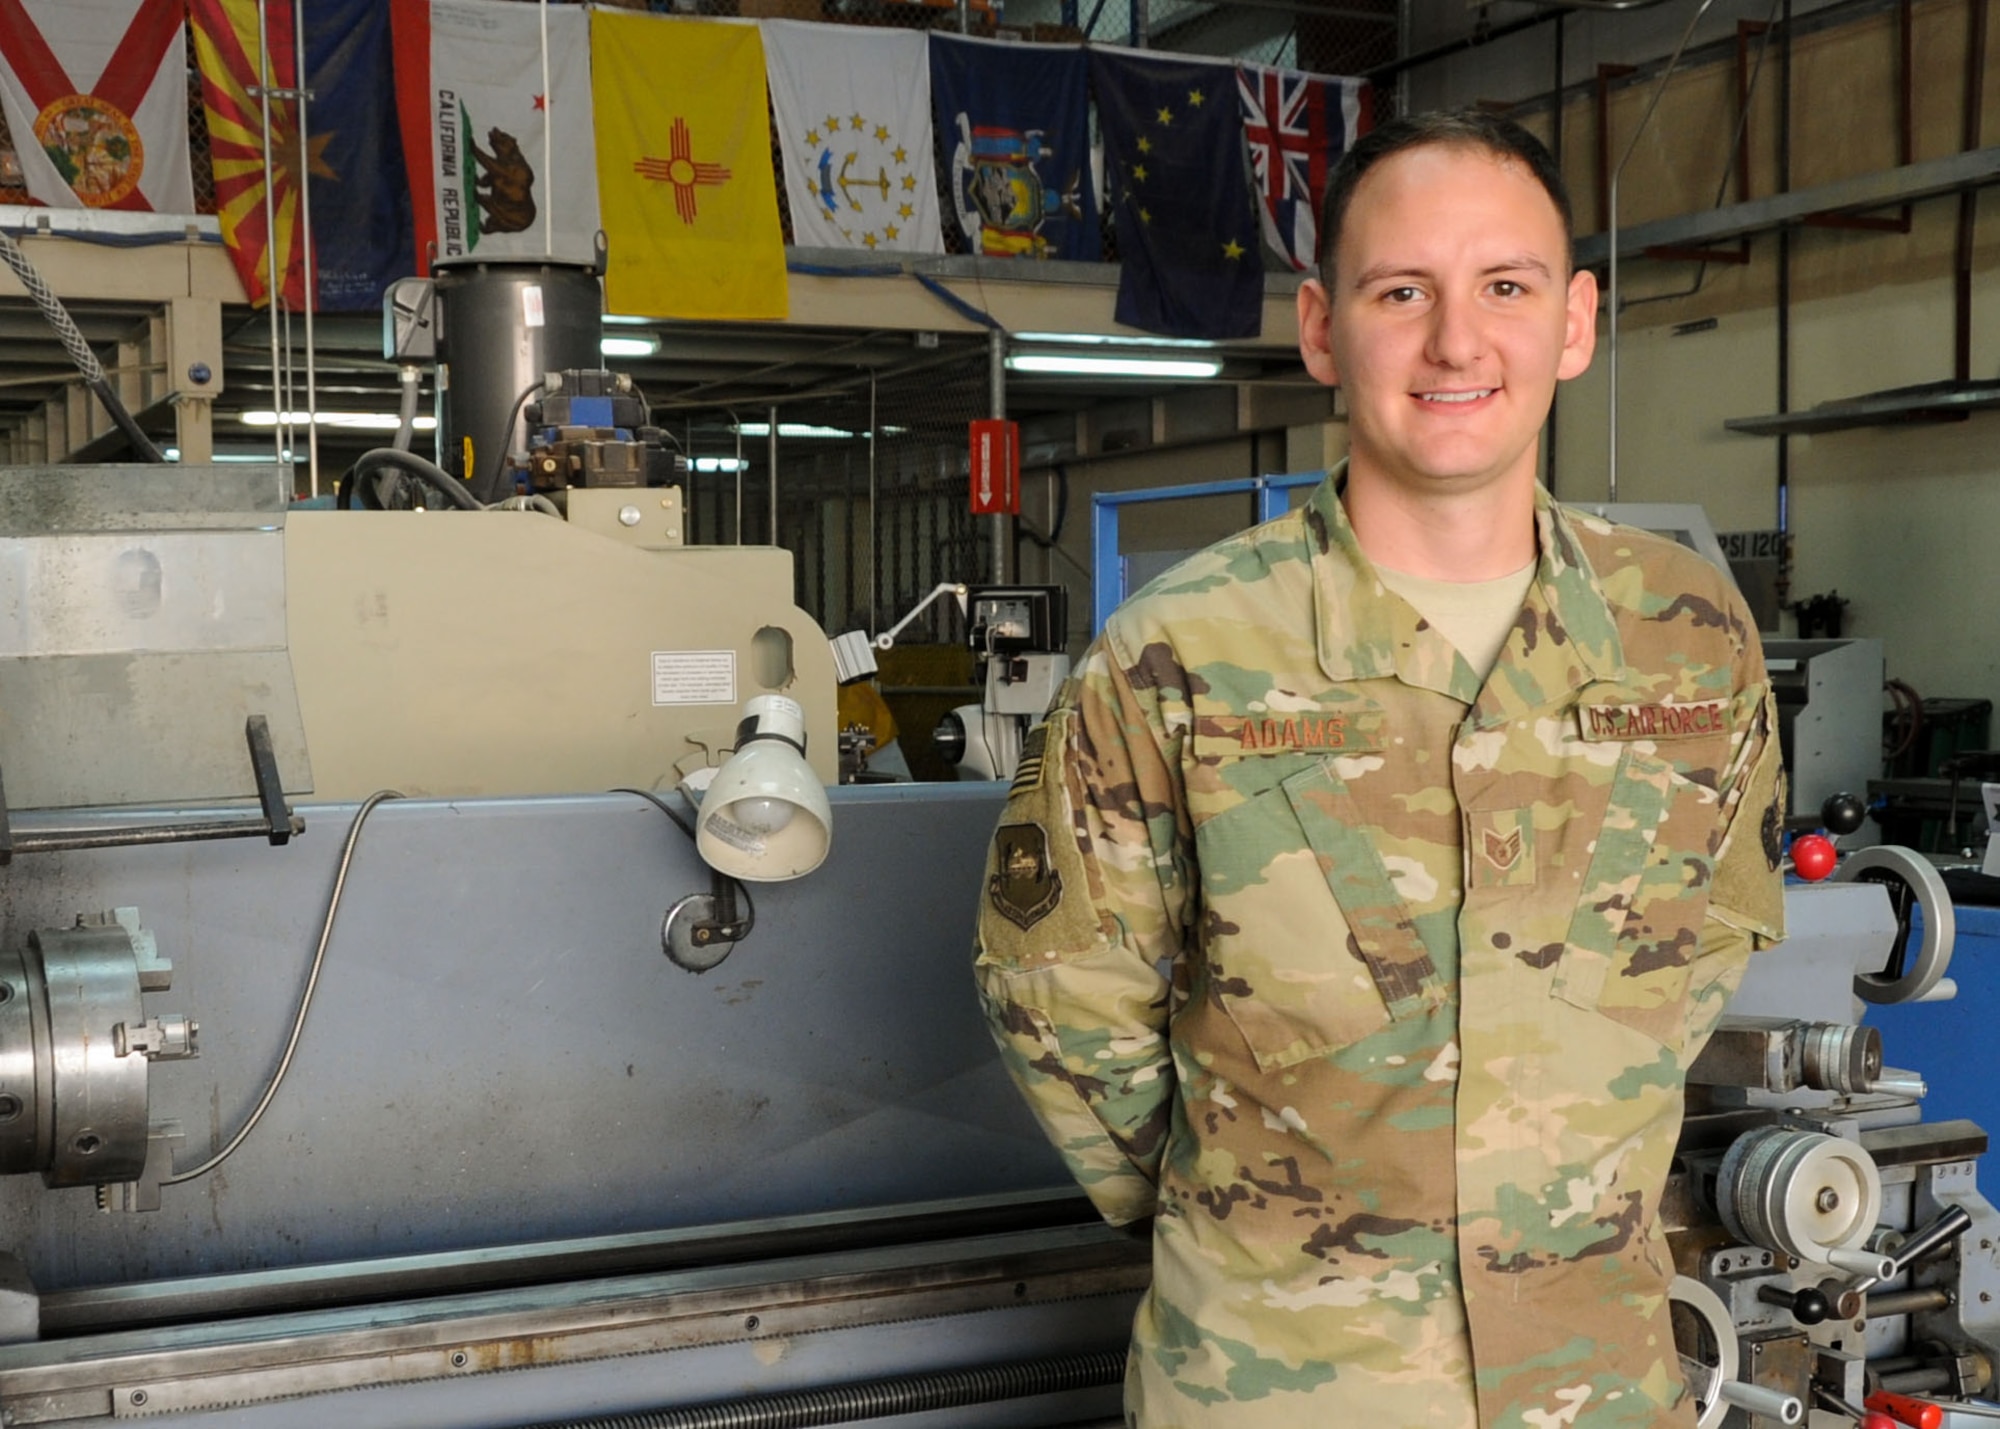 This week’s Rock Solid Warrior is Staff Sgt. Eric Adams, a 386th Expeditionary Maintenance Squadron quality assurance inspector. He is deployed from Kadena Air Force Base, Japan. The Rock Solid Warrior program is a way to recognize and spotlight the Airmen of the 386th Air Expeditionary Wing for their positive impact and commitment to the mission. (U.S. Air Force photo/Tech. Sgt. Kenny McCann)
